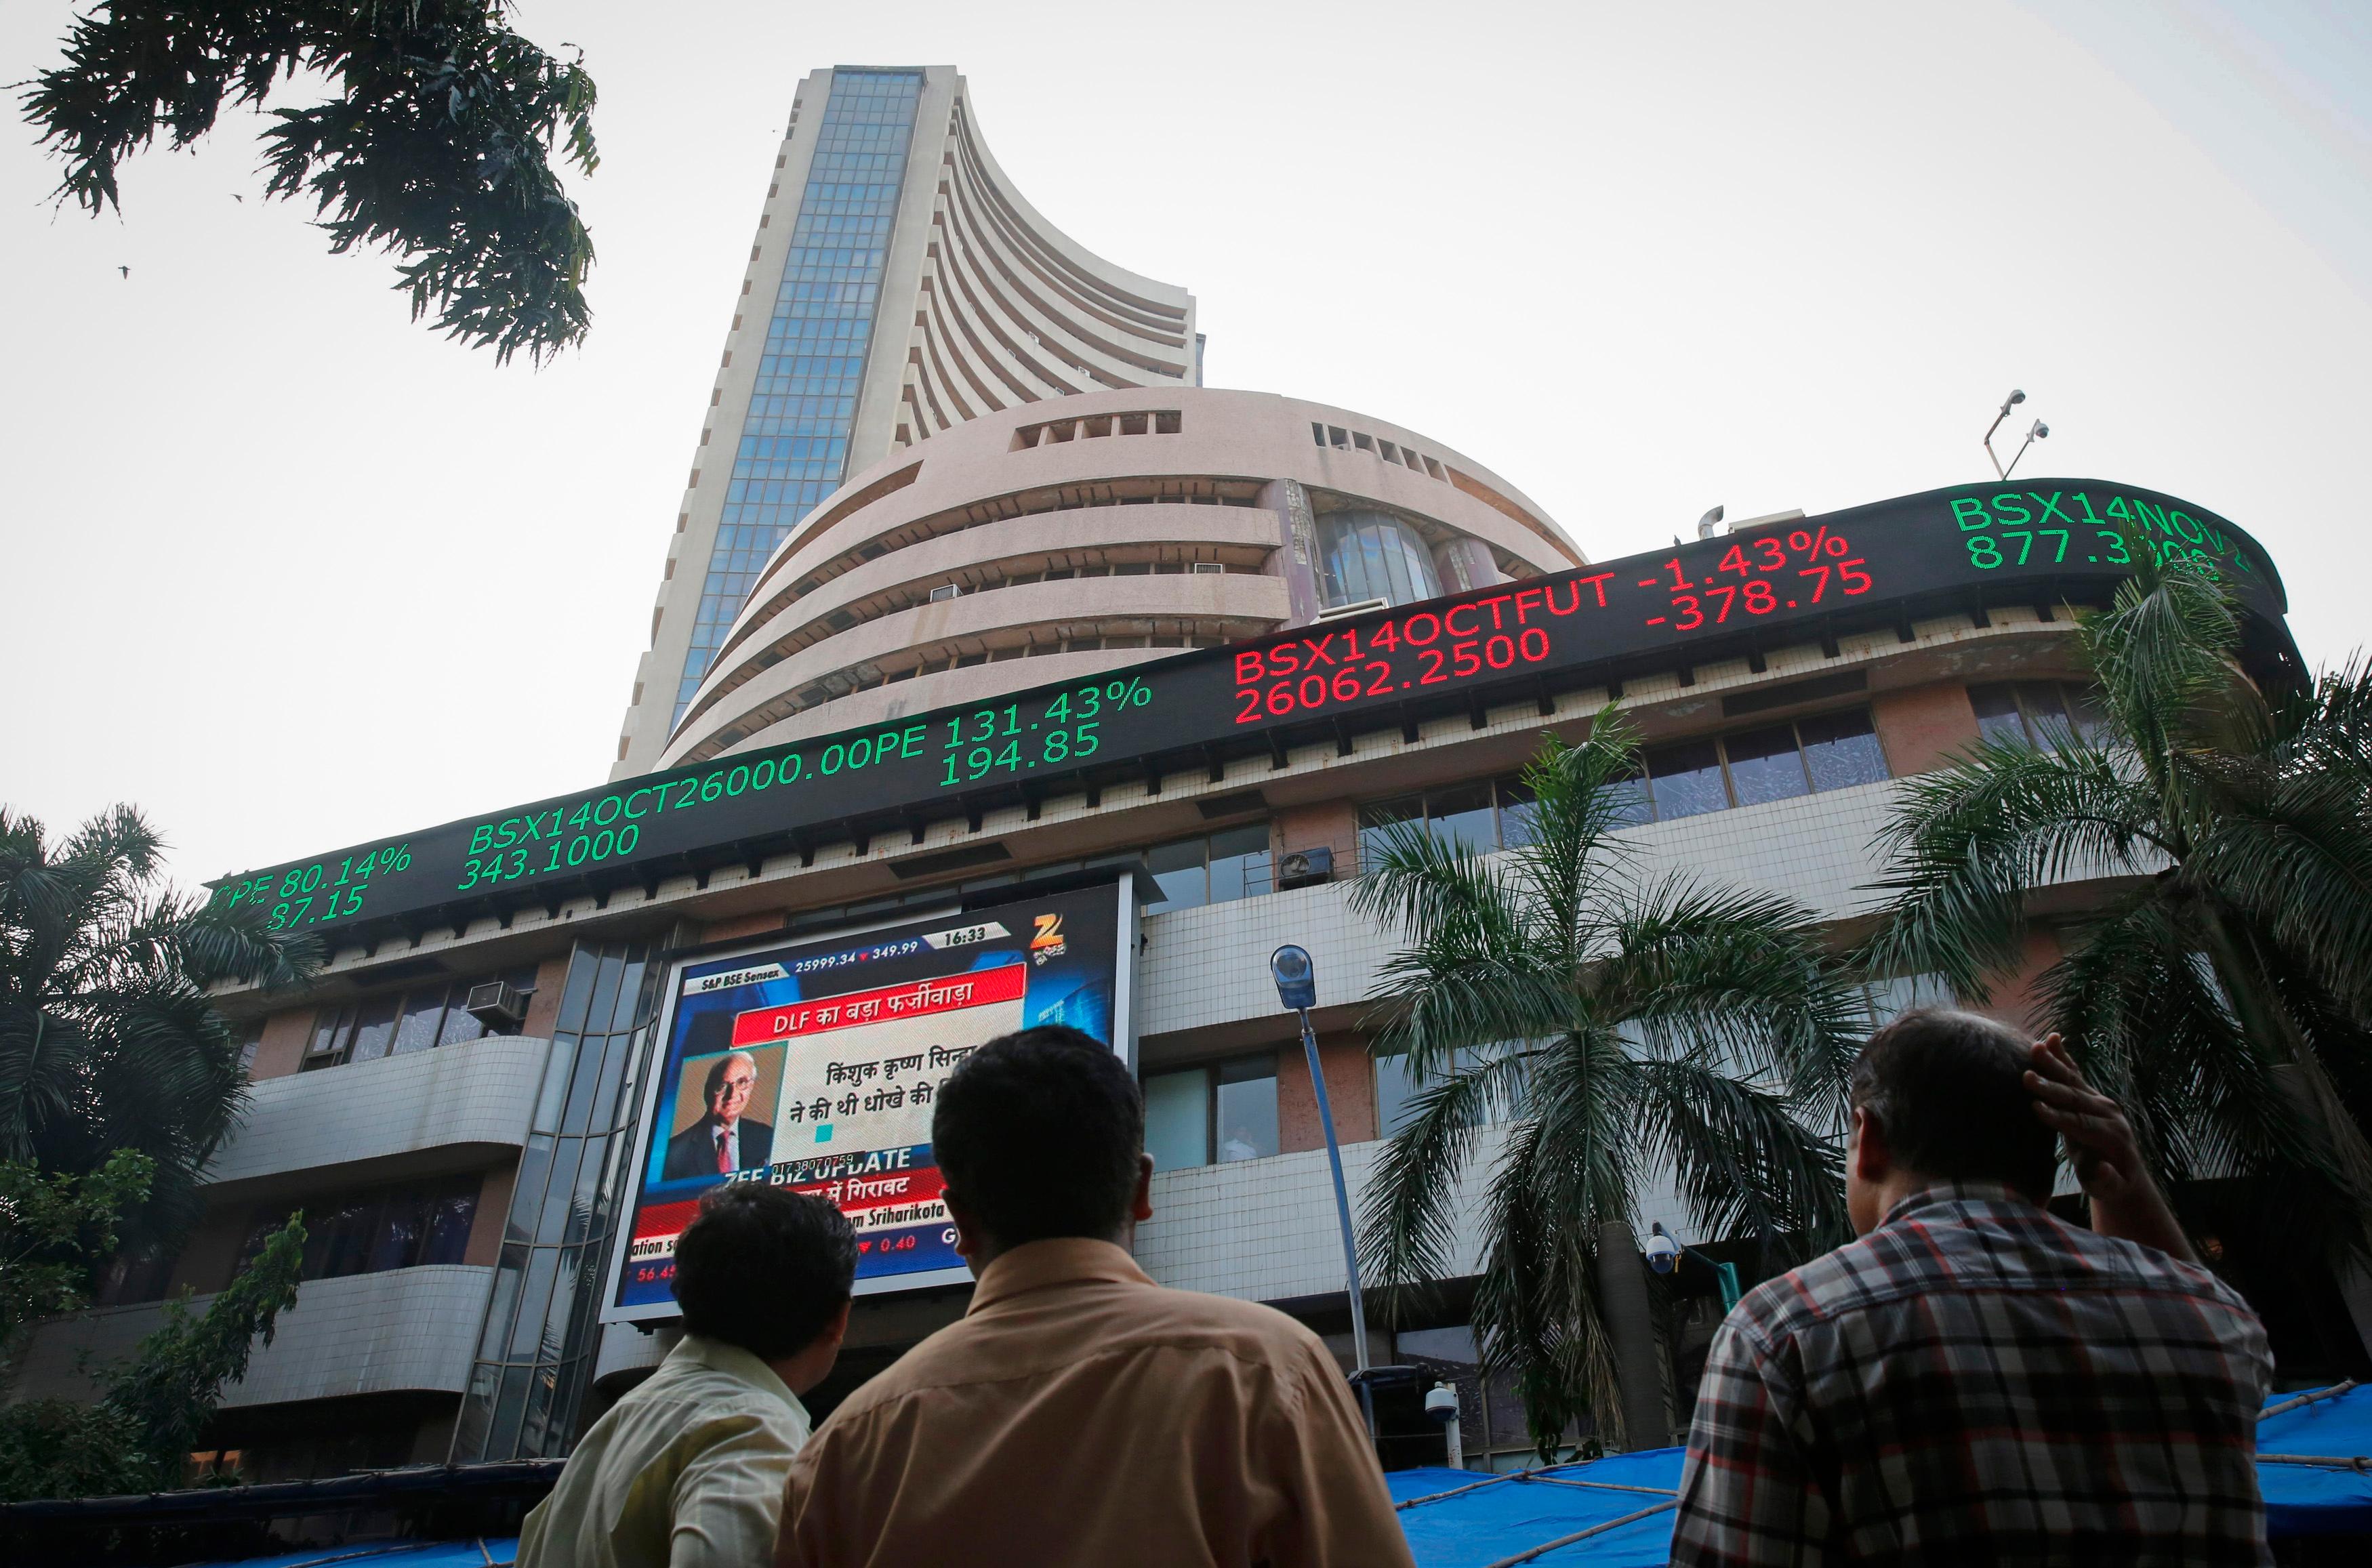 Sensex plunges over 500 points as rupee dips to 13-month low